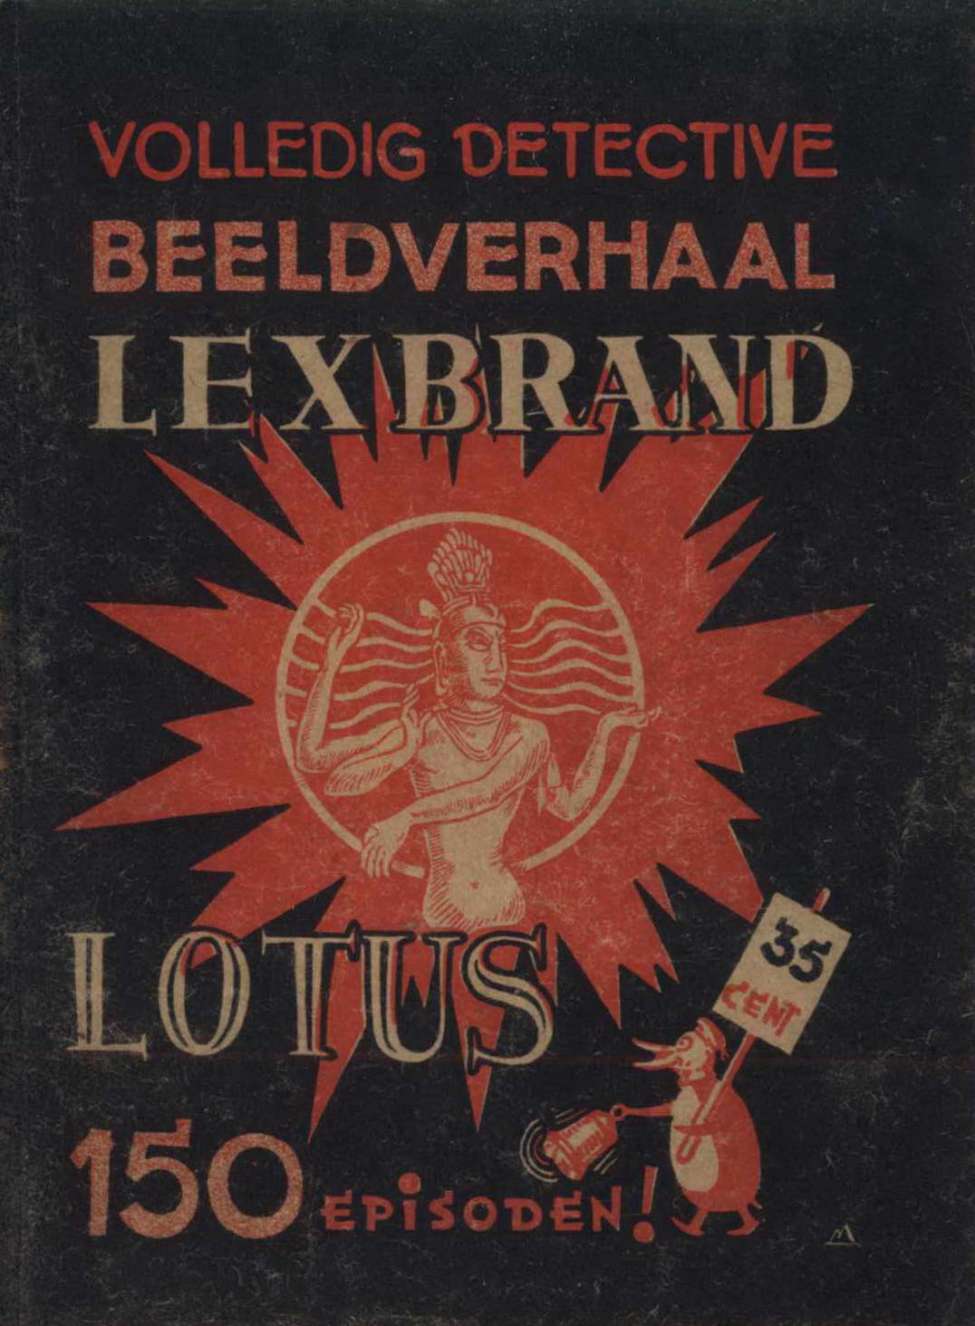 Comic Book Cover For Lex Brand 5 - Lotus